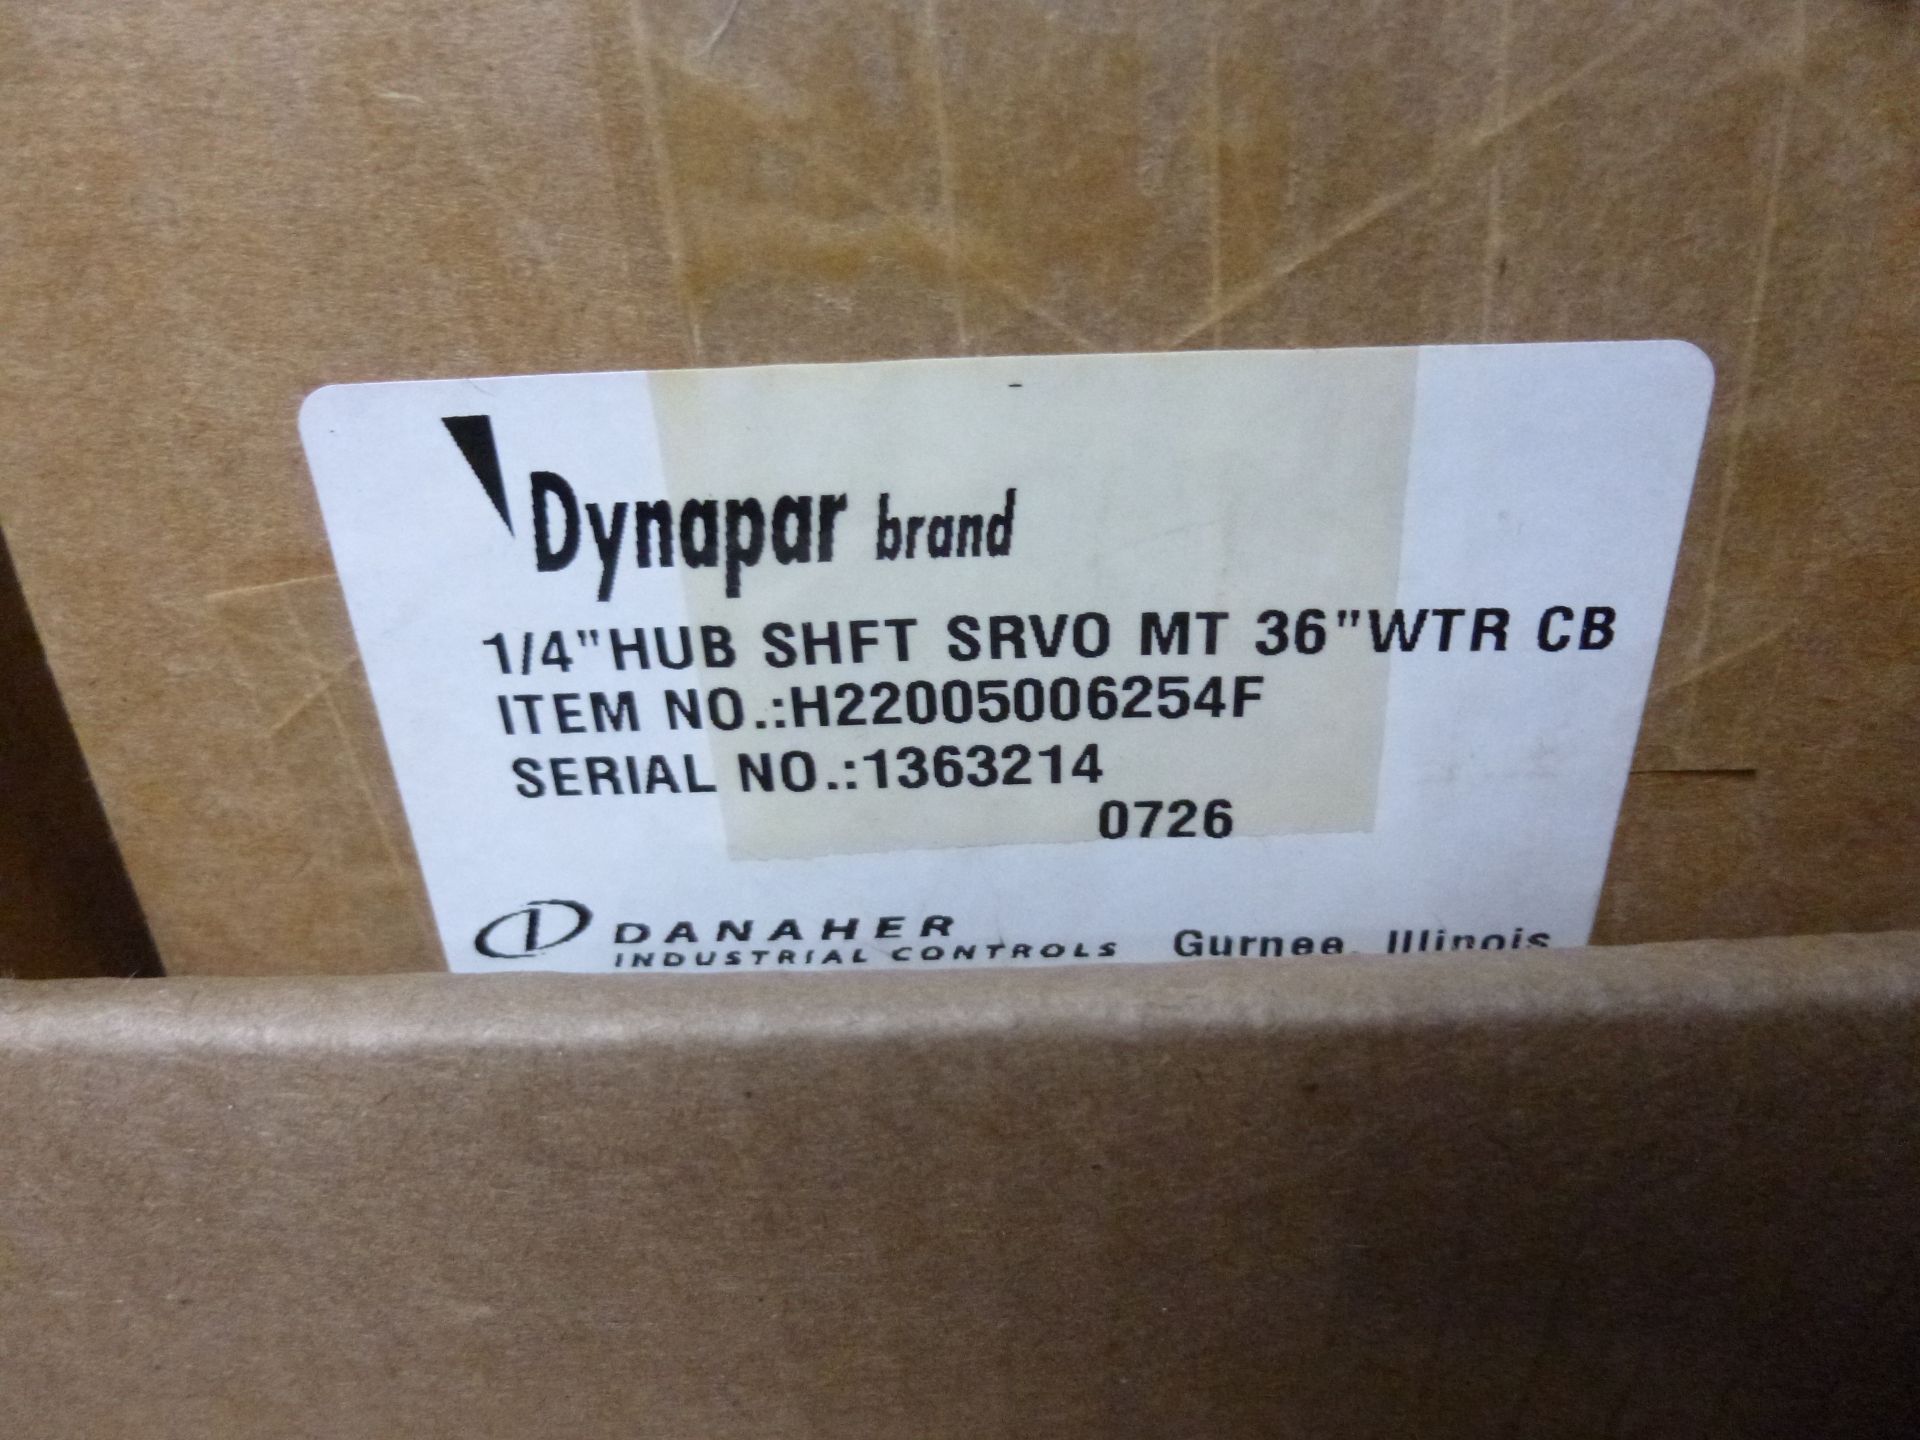 Dynapar H22005006254 (new in box)Shipping can be prepared for either ground package or LTL for - Image 2 of 2